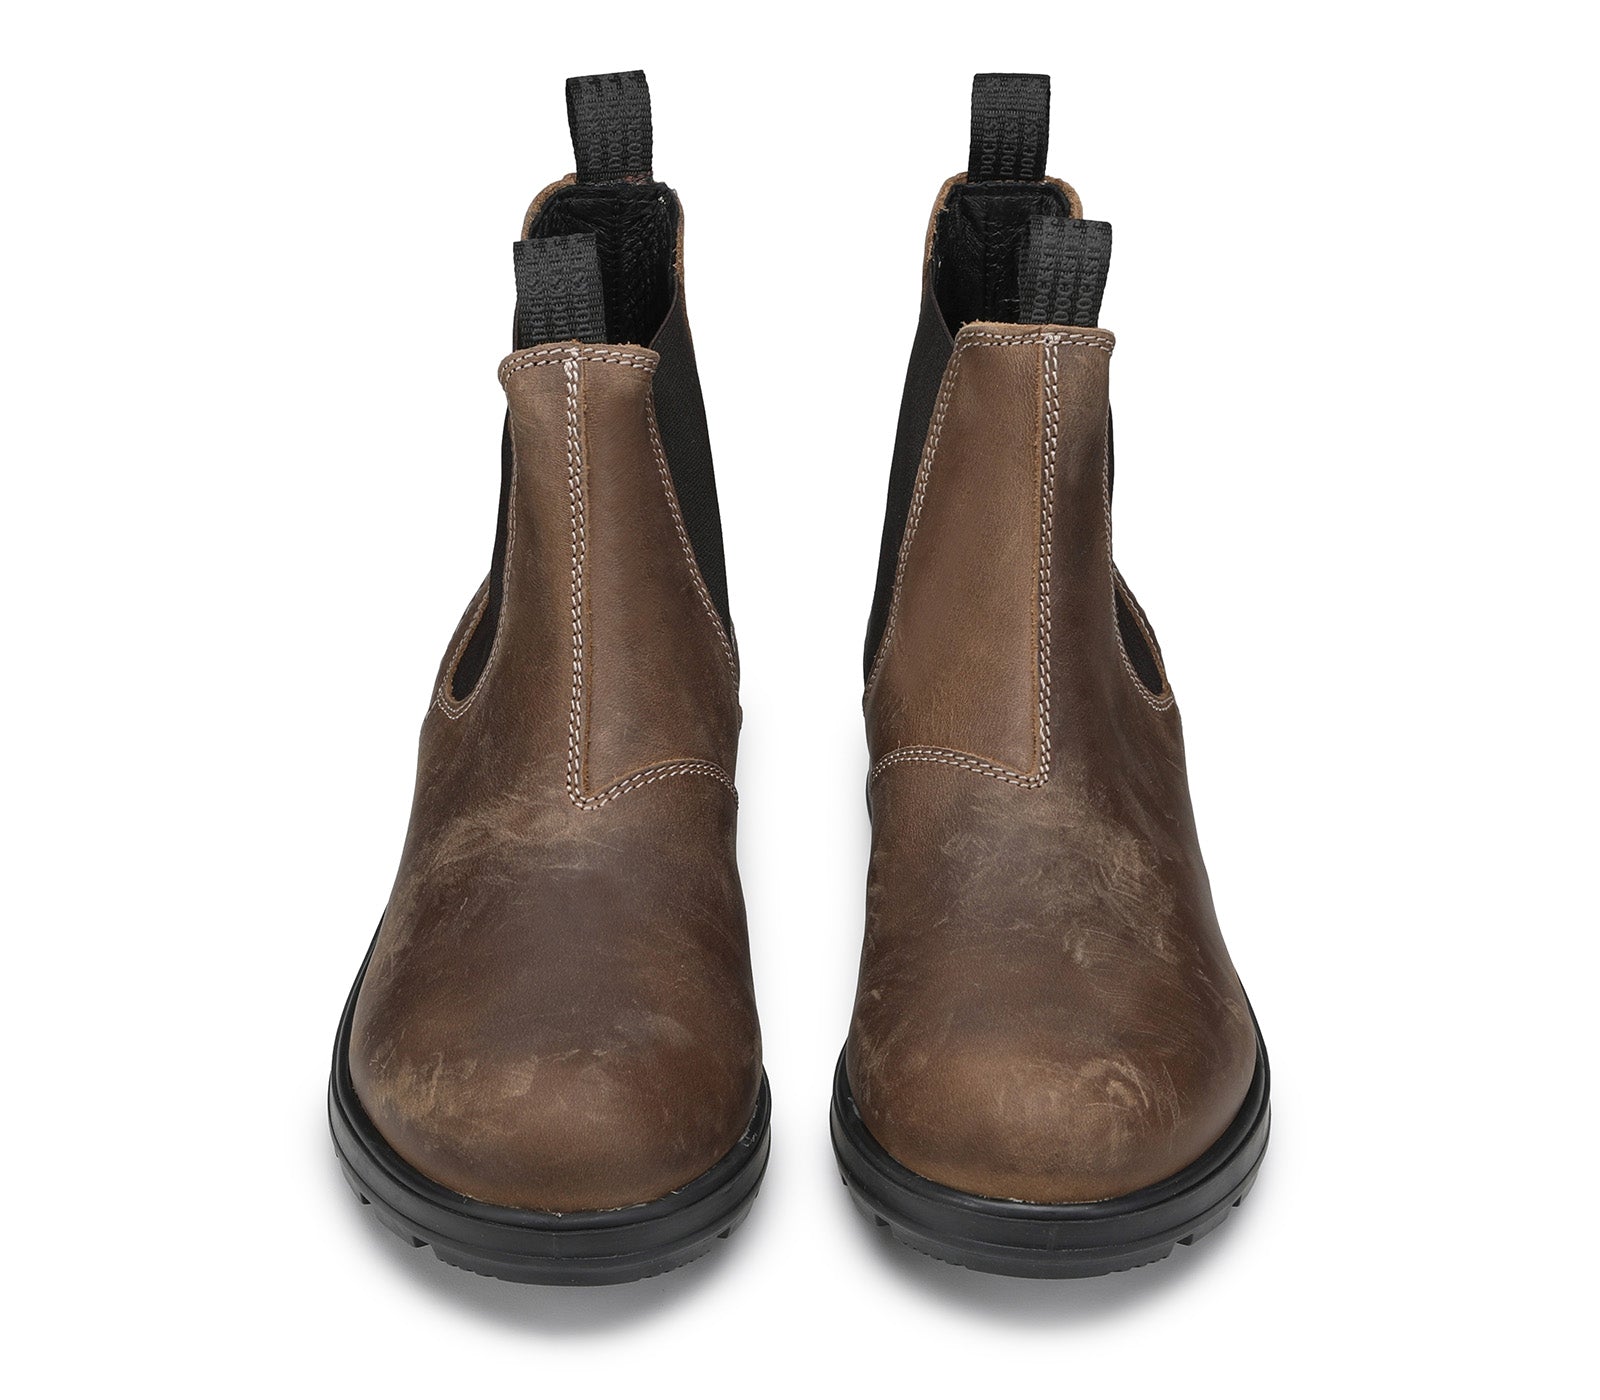 Brown Leather Men's Boots with Black Elasticized Side Inserts